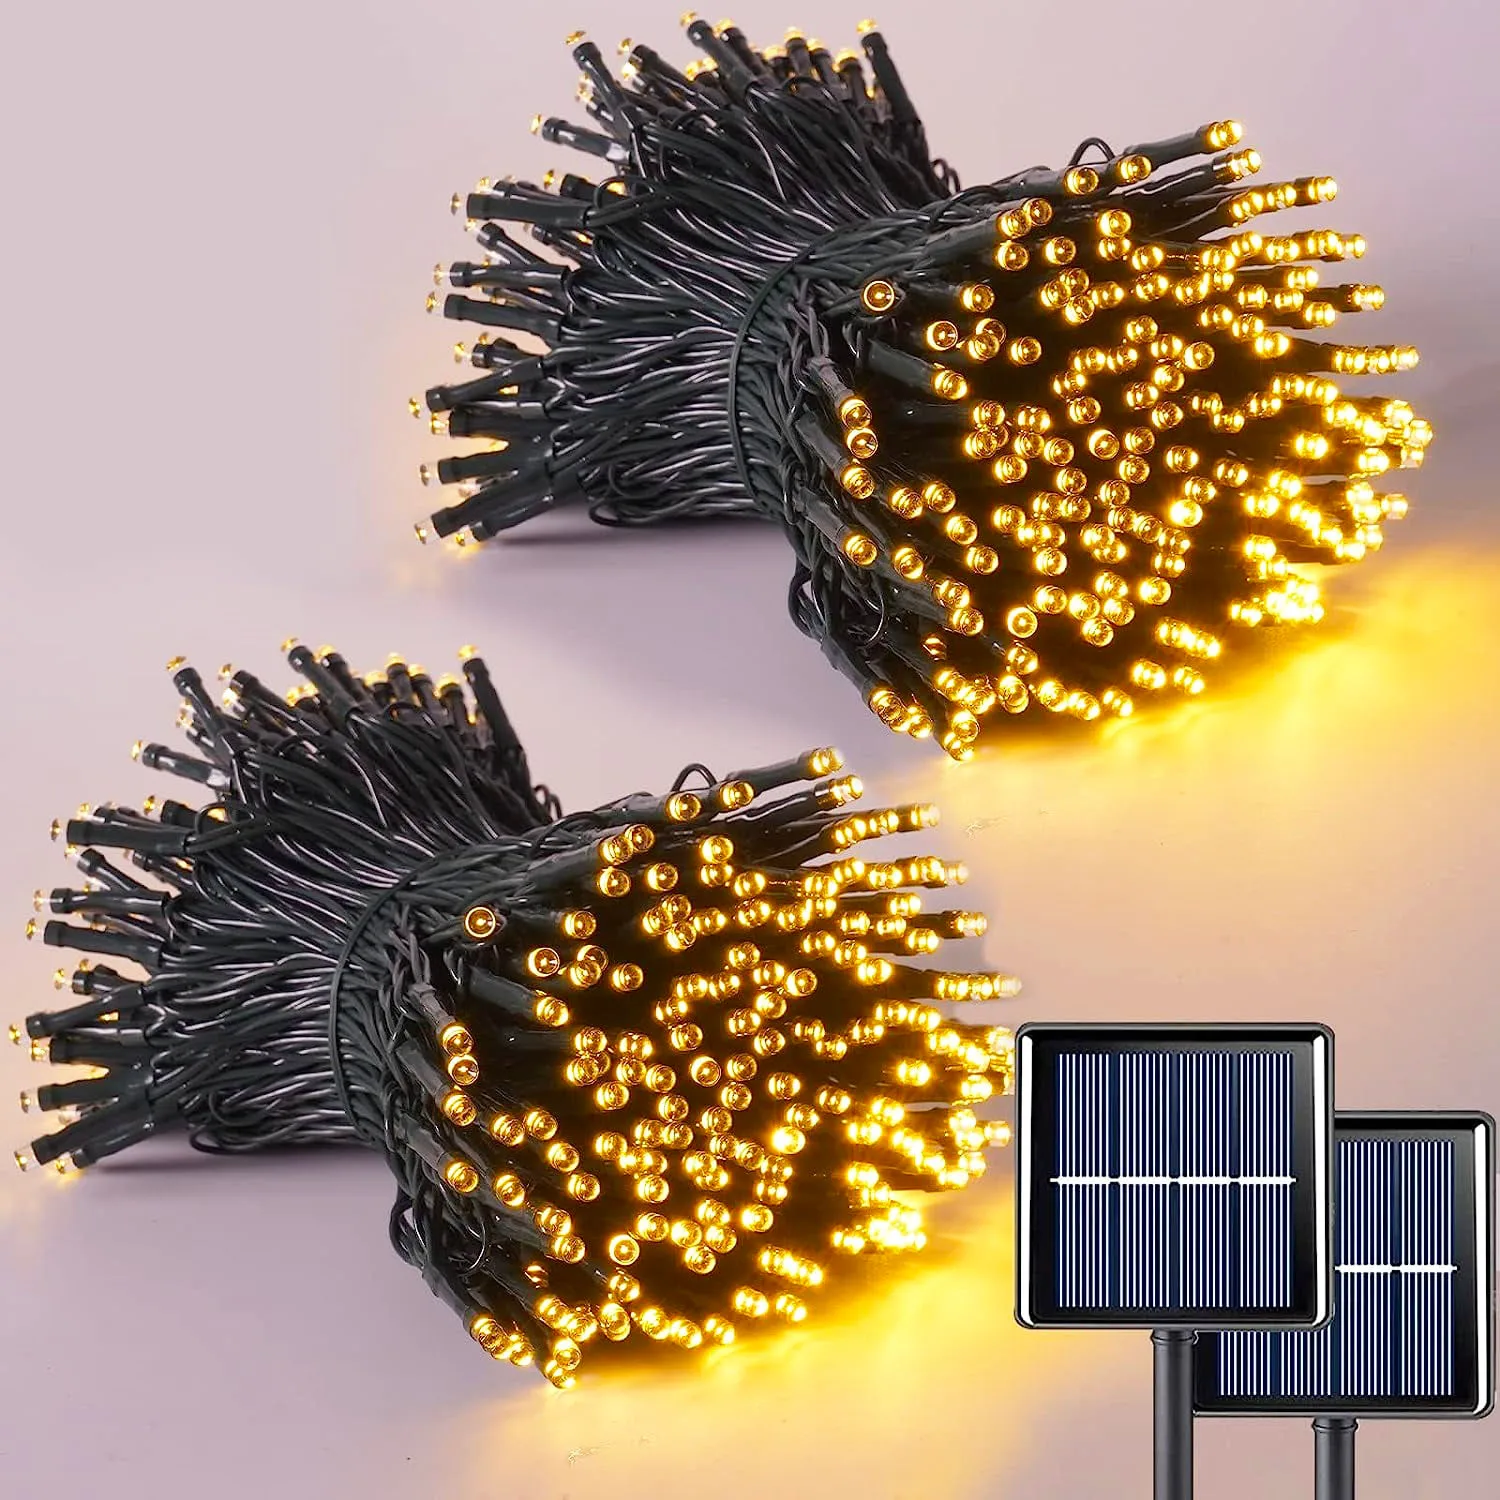 2Pack Solar String Lights Outdoor Waterproof Fairy Christmas Twinkle Lights with 8 Modes Tree Lights for Outdoor Garden Patio solar automatic drip irrigation kit automatic watering irrigation system 7 timing modes 30 watering modes 98 42ft for garden beds patio lawn plants